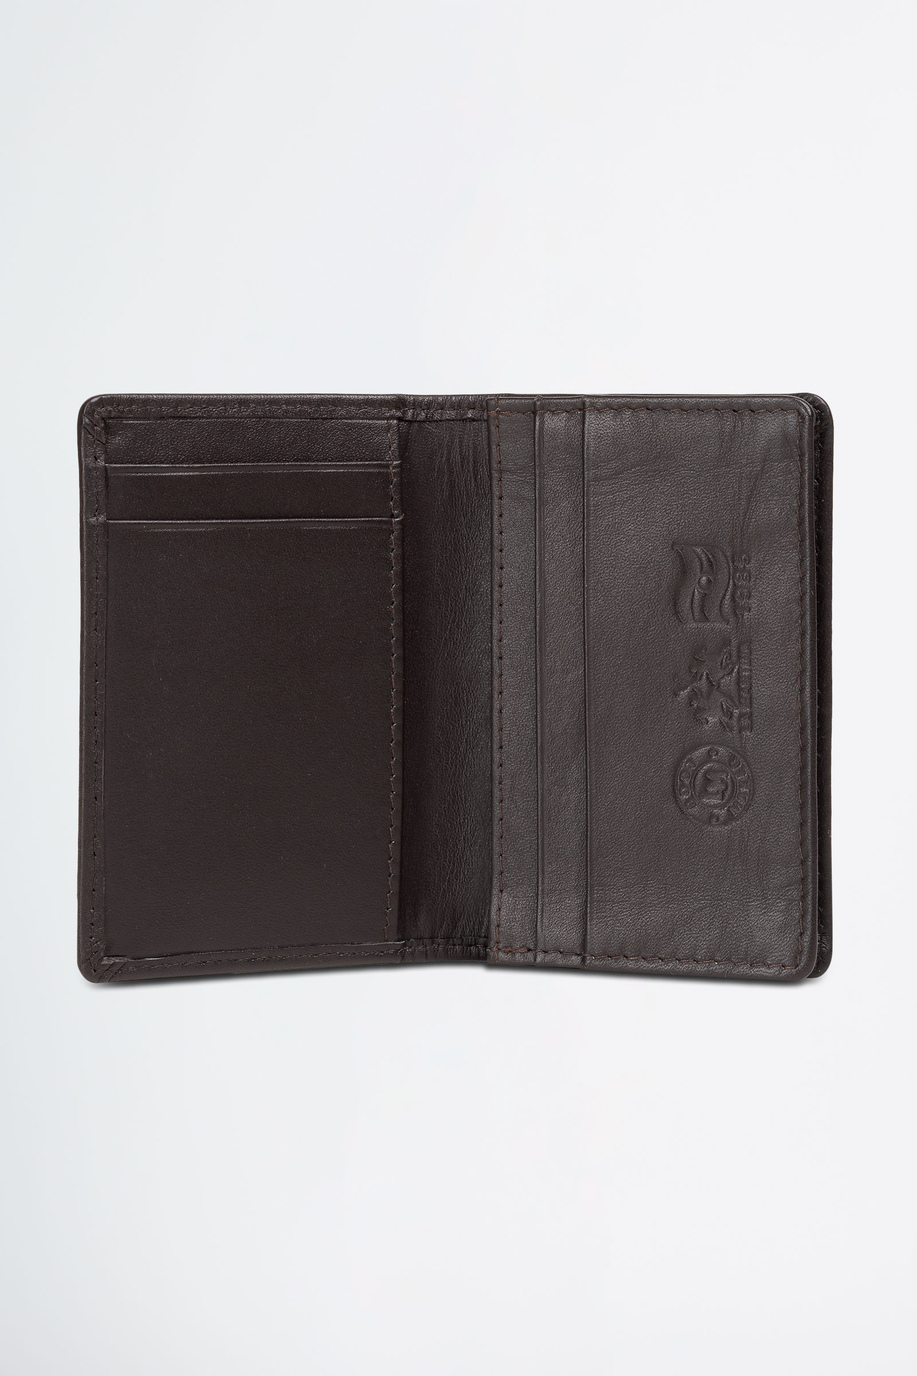 Leather ticket holder - Wallets and key chains | La Martina - Official Online Shop